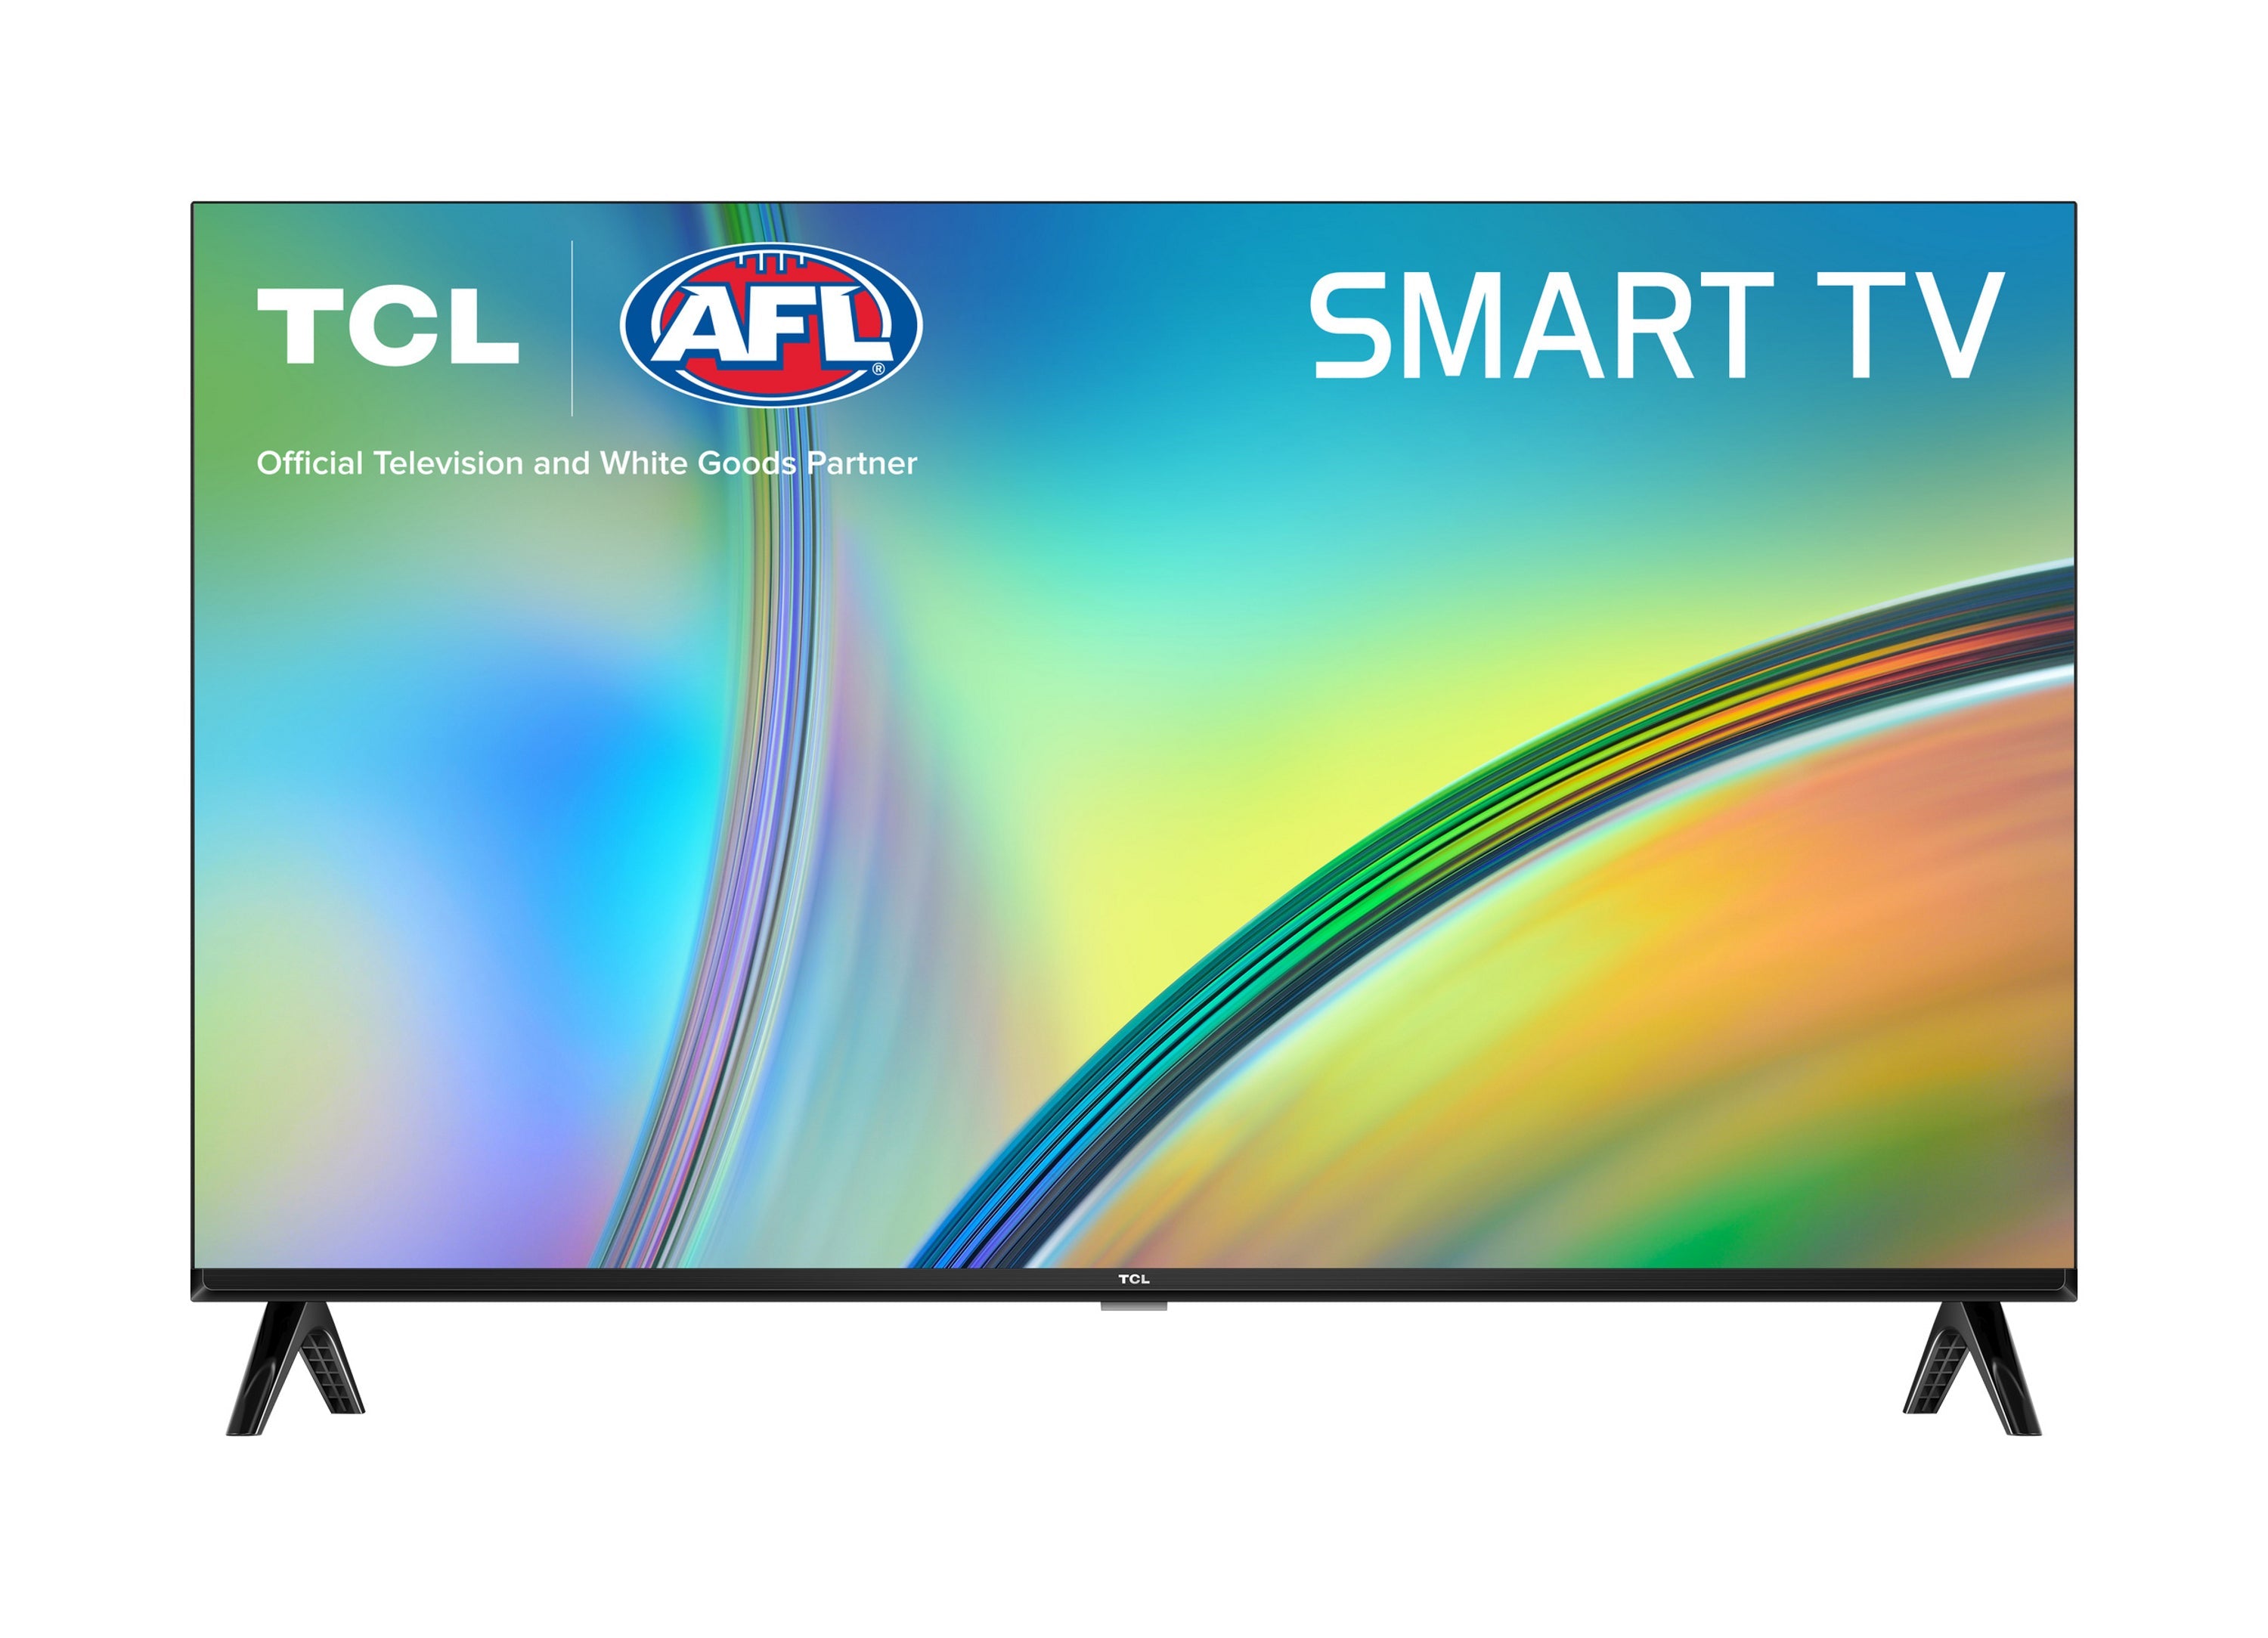 TCL FHD Android Smart TV 32